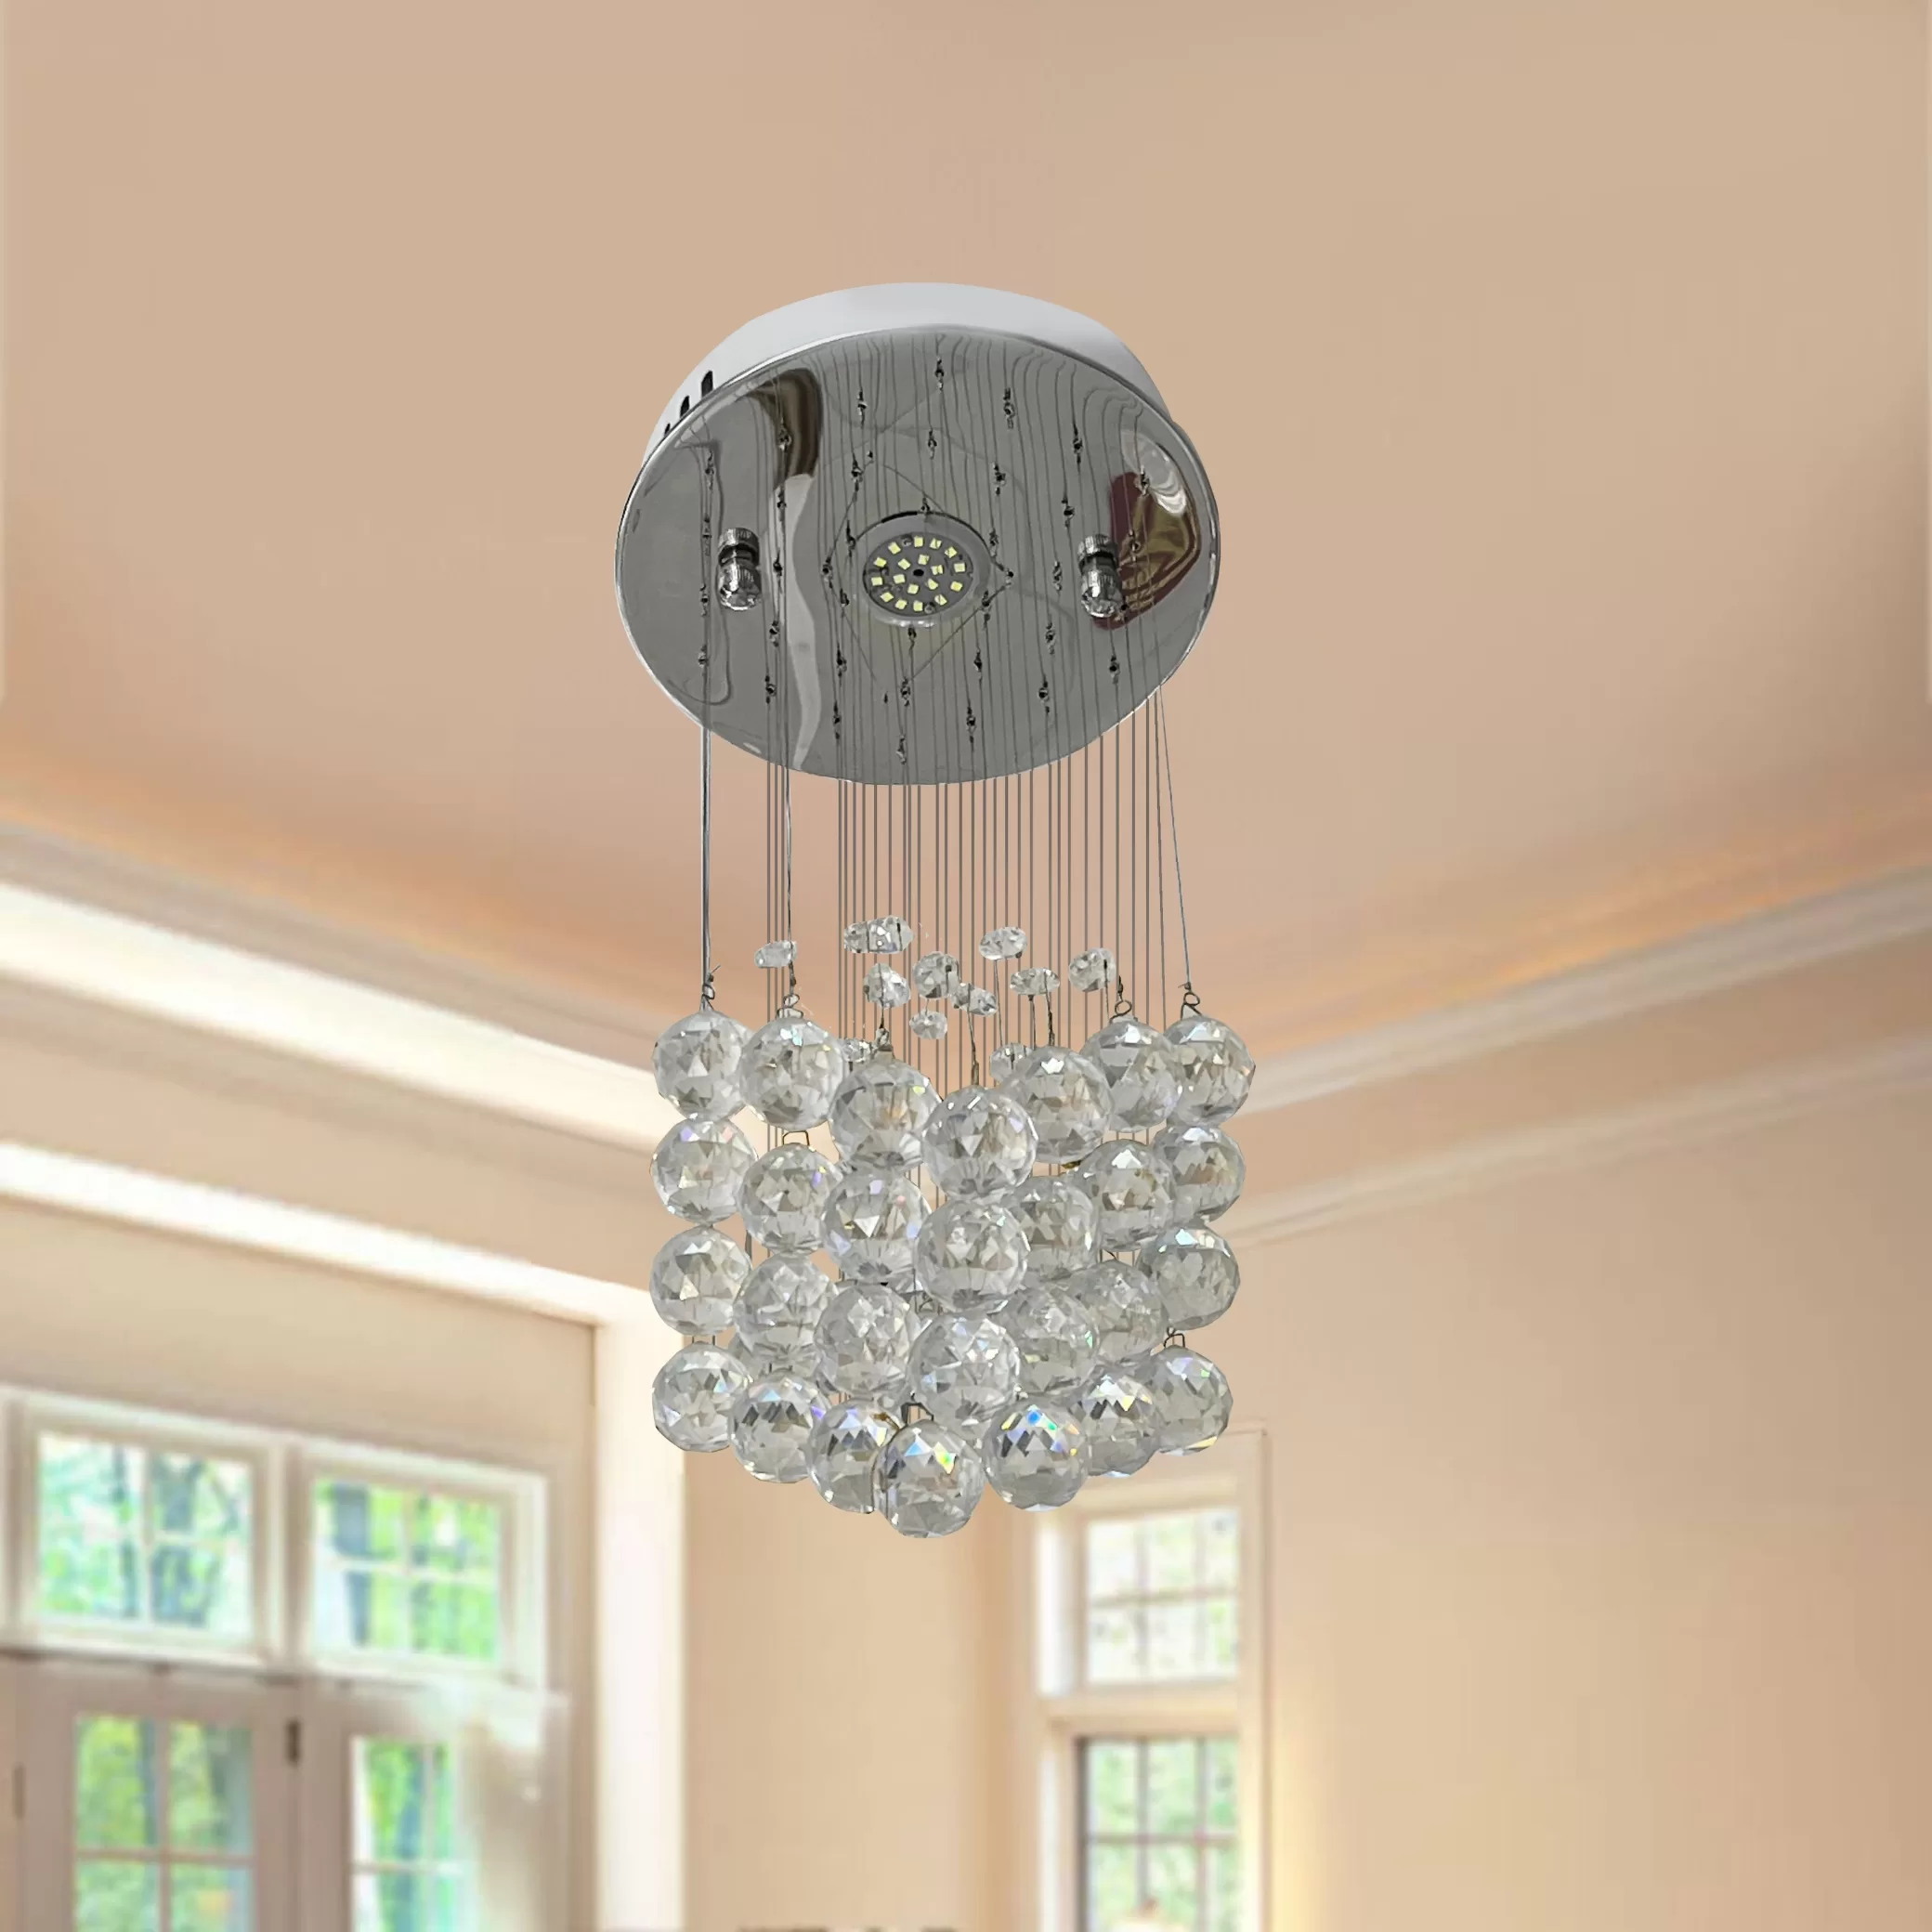 50% Discount Flush Mounted Chandelier